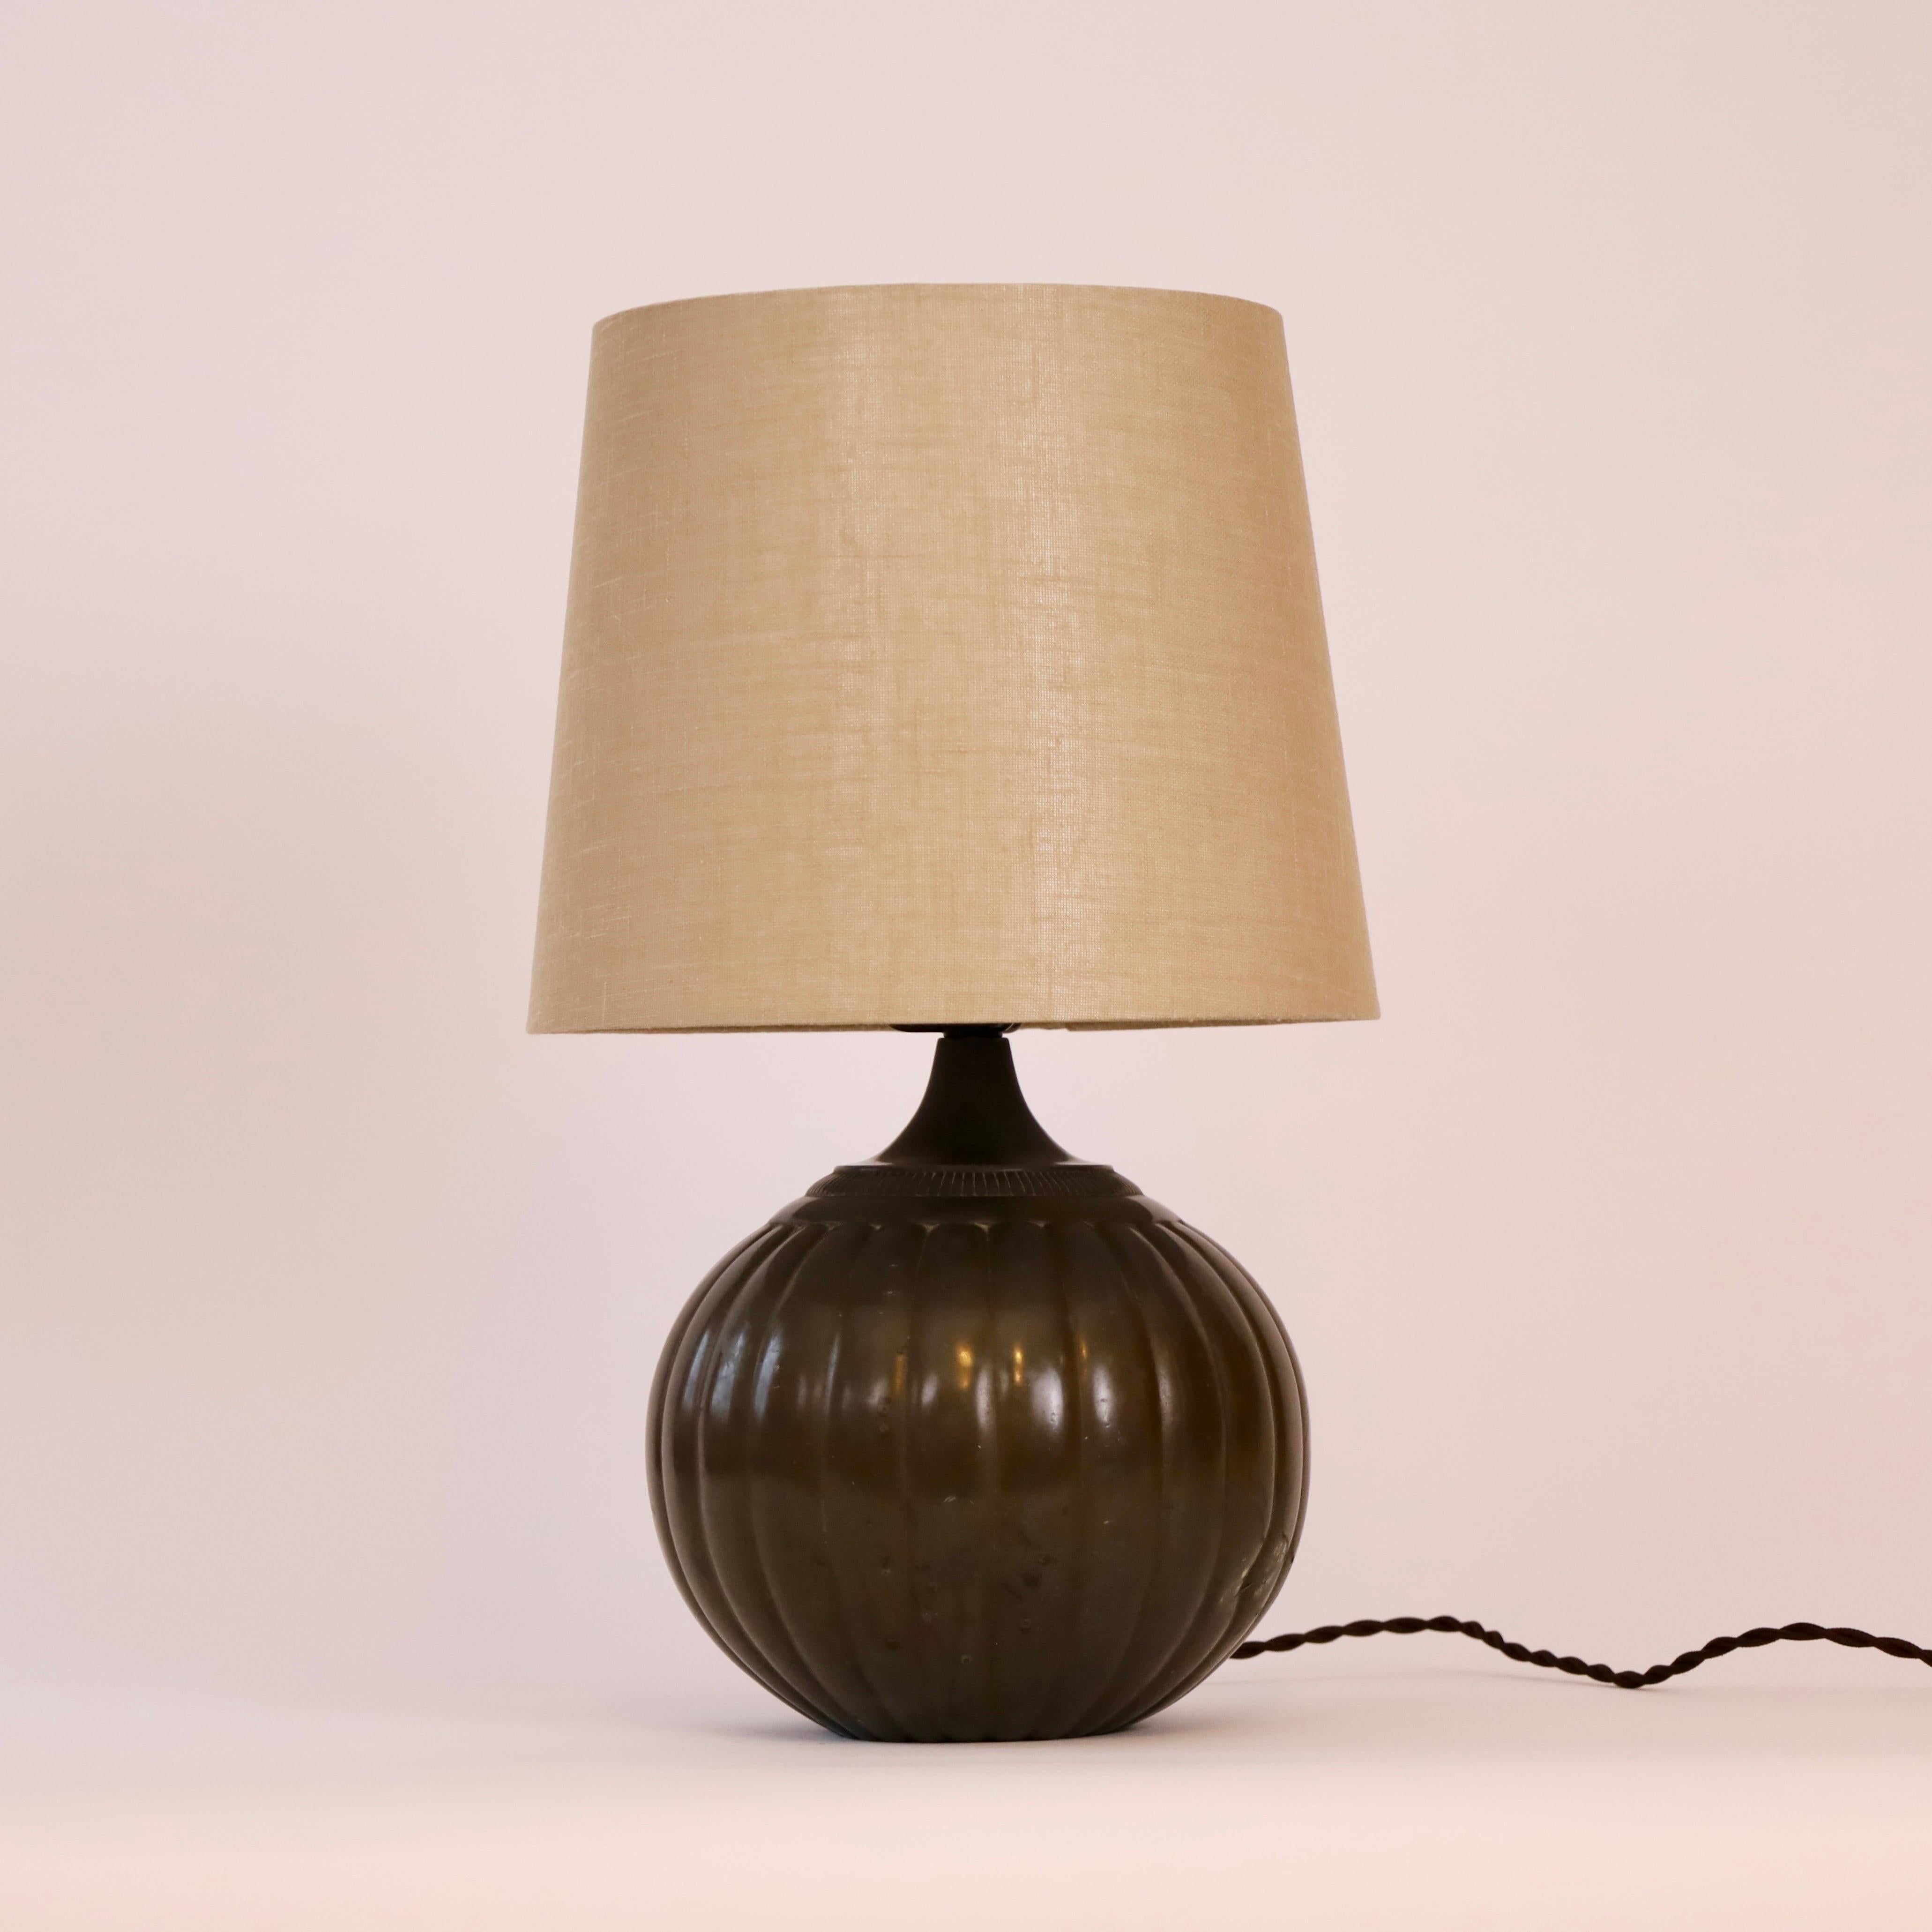 A rare table lamp designed by Just Andersen in 1934. A classic piece of Danish design history for a beautiful home.  

* A round metal lamp with vertical lines and a beige fabric shade
* Designer: Just Andersen
* Model: 1632 (stamped ‘Just 1632’)
*